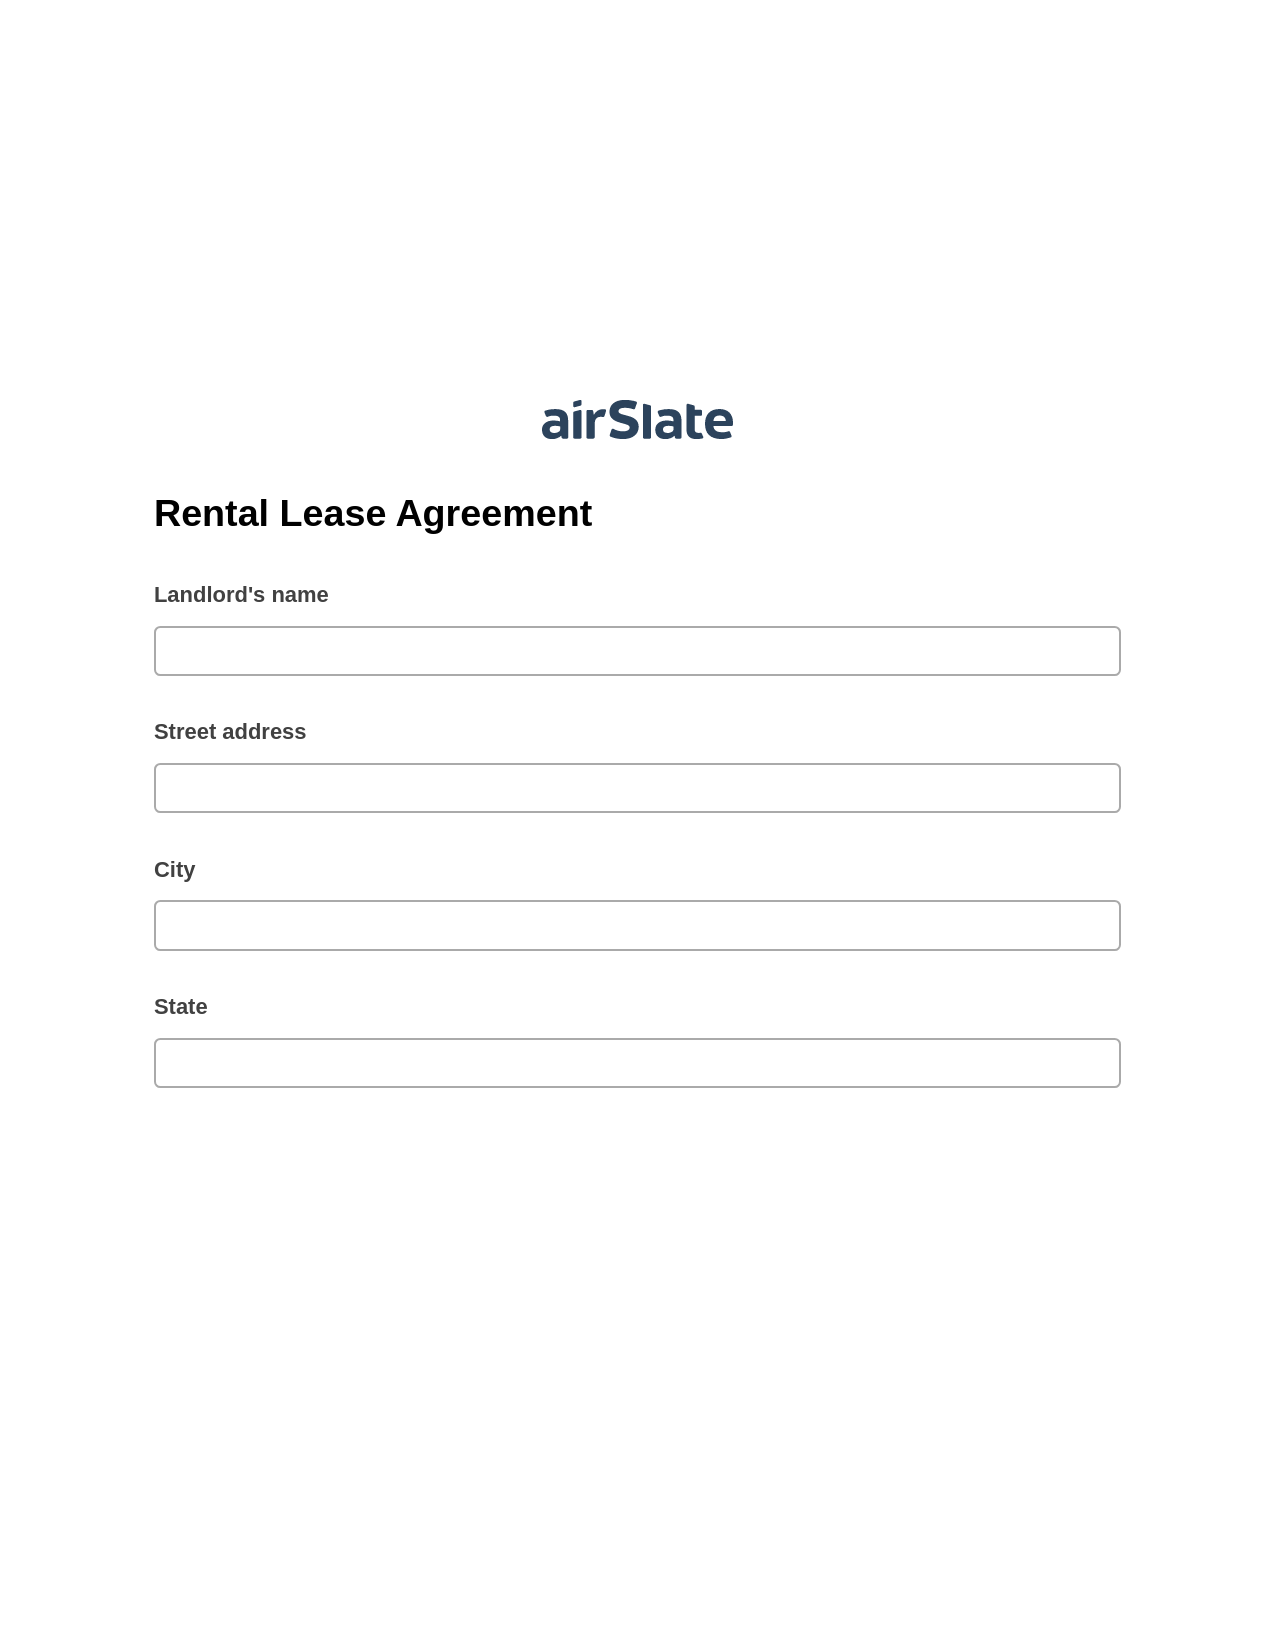 Rental Lease Agreement Pre-fill from Excel Spreadsheet Bot, Set signature type addon, Export to NetSuite Record Bot